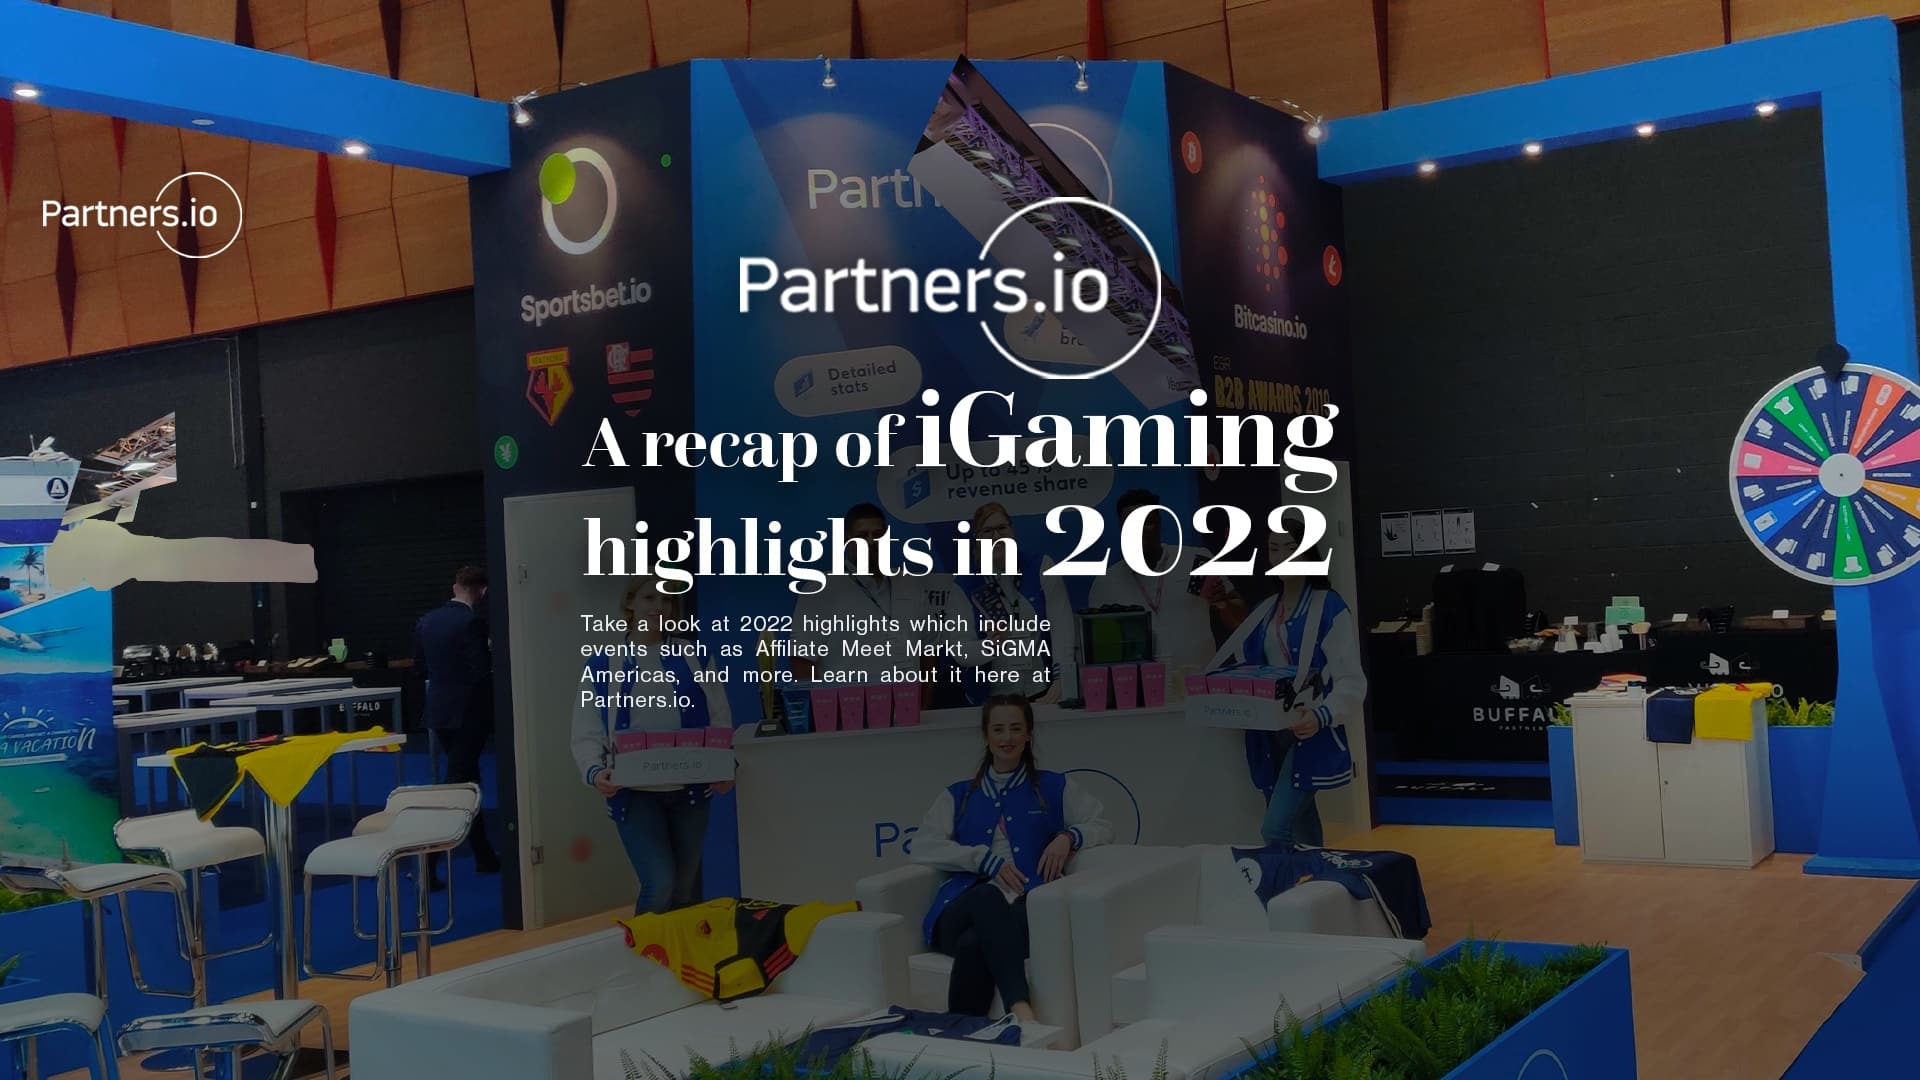 Partners.io: A recap of iGaming highlights in 2022